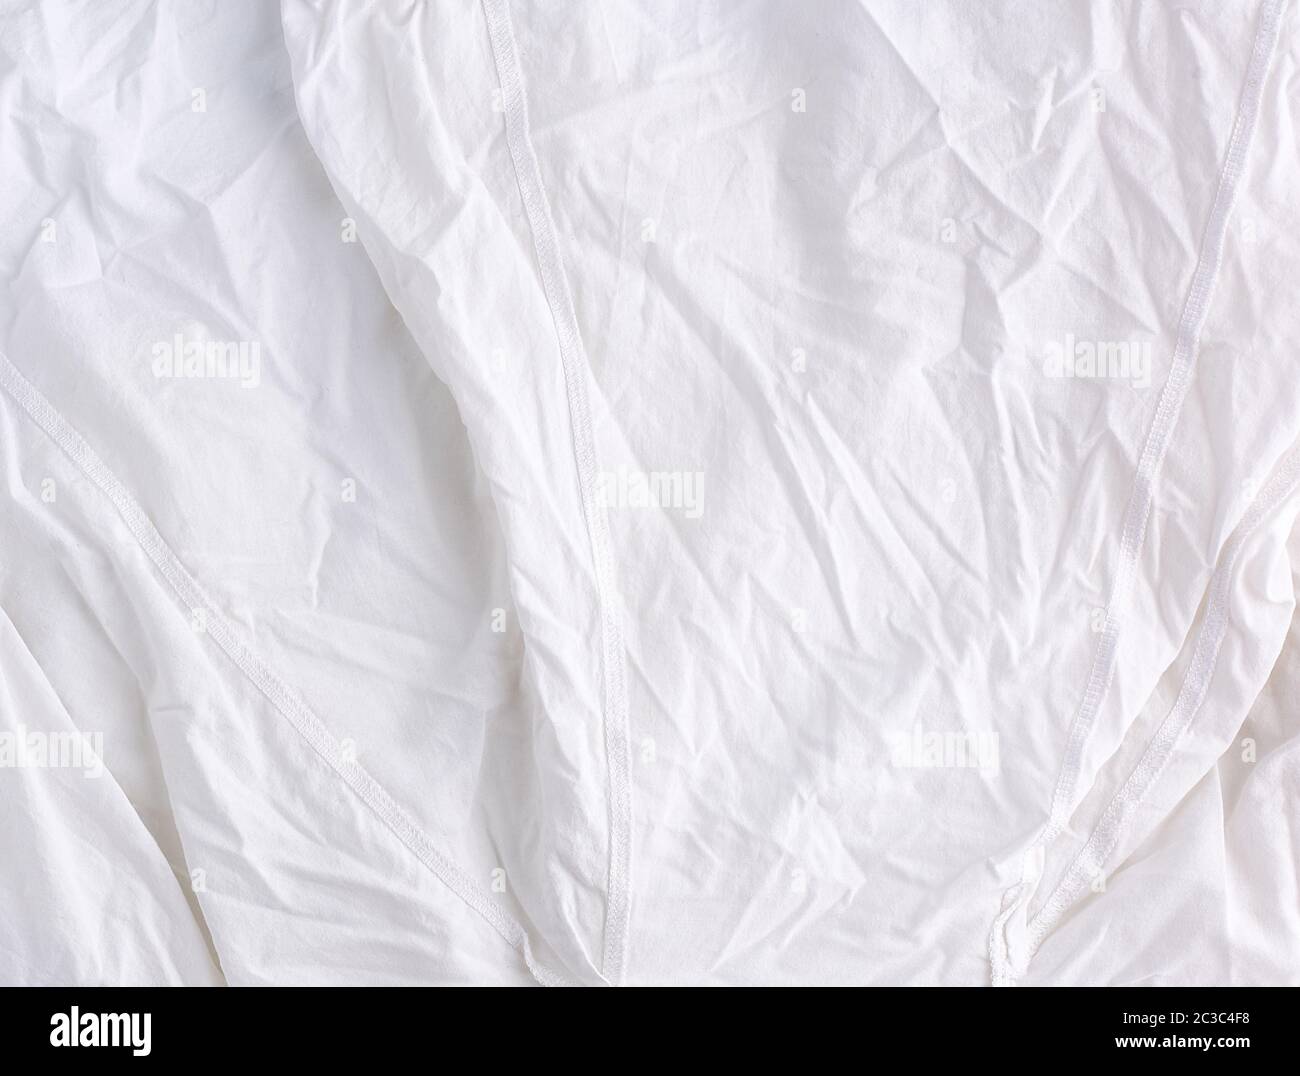 Crumpled White Cotton Fabric Fabric For Sewing Clothes And Shirts Stock  Photo - Download Image Now - iStock